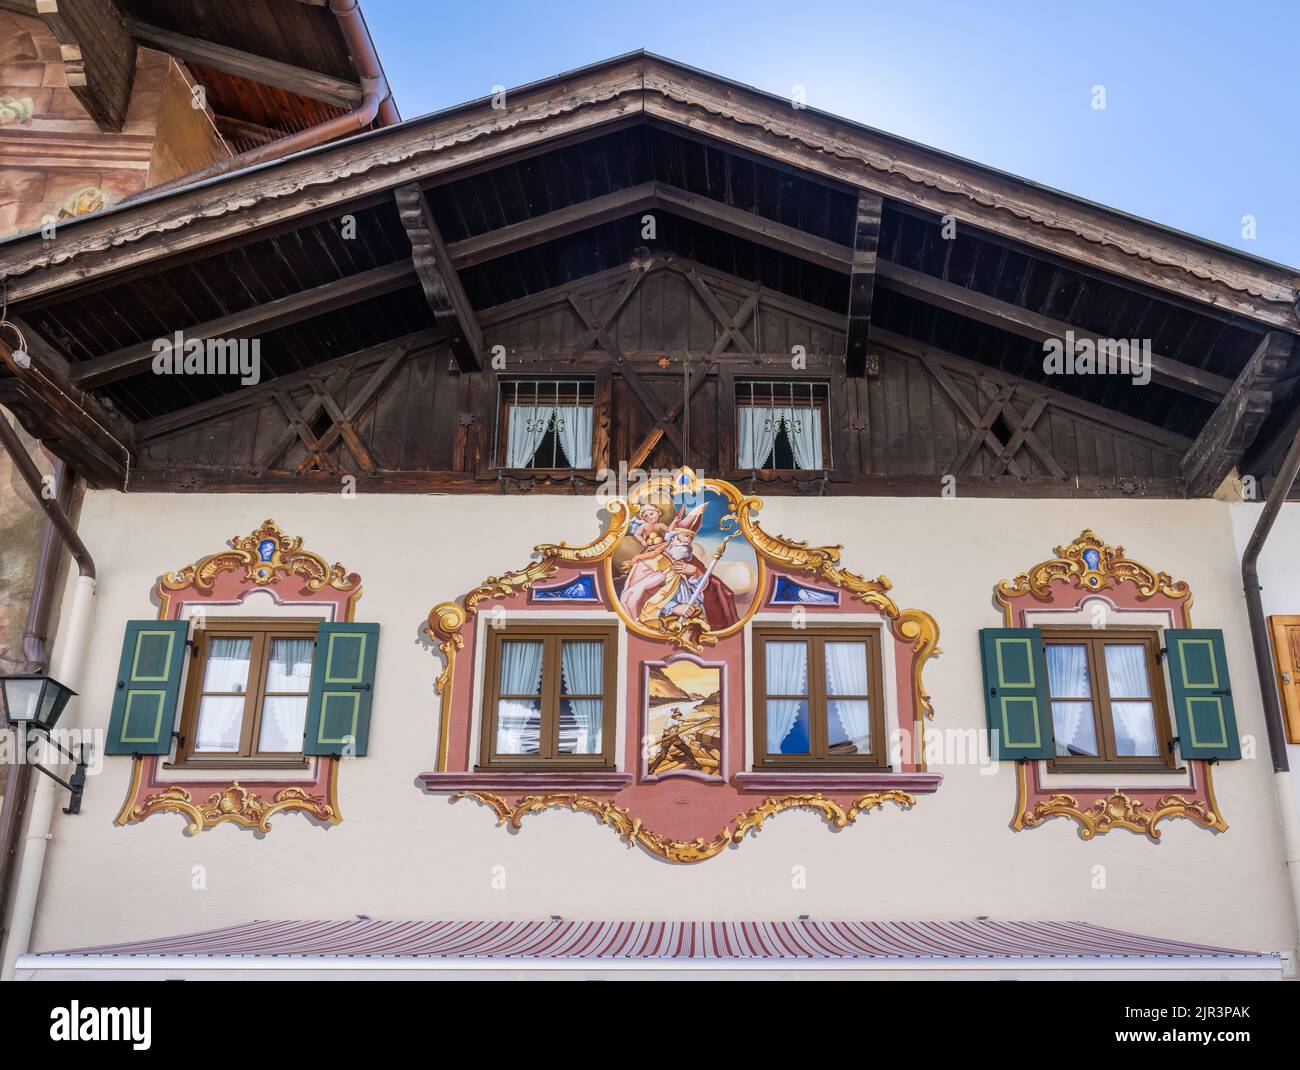 Painted building in historic Mittenwald, Germany Stock Photo